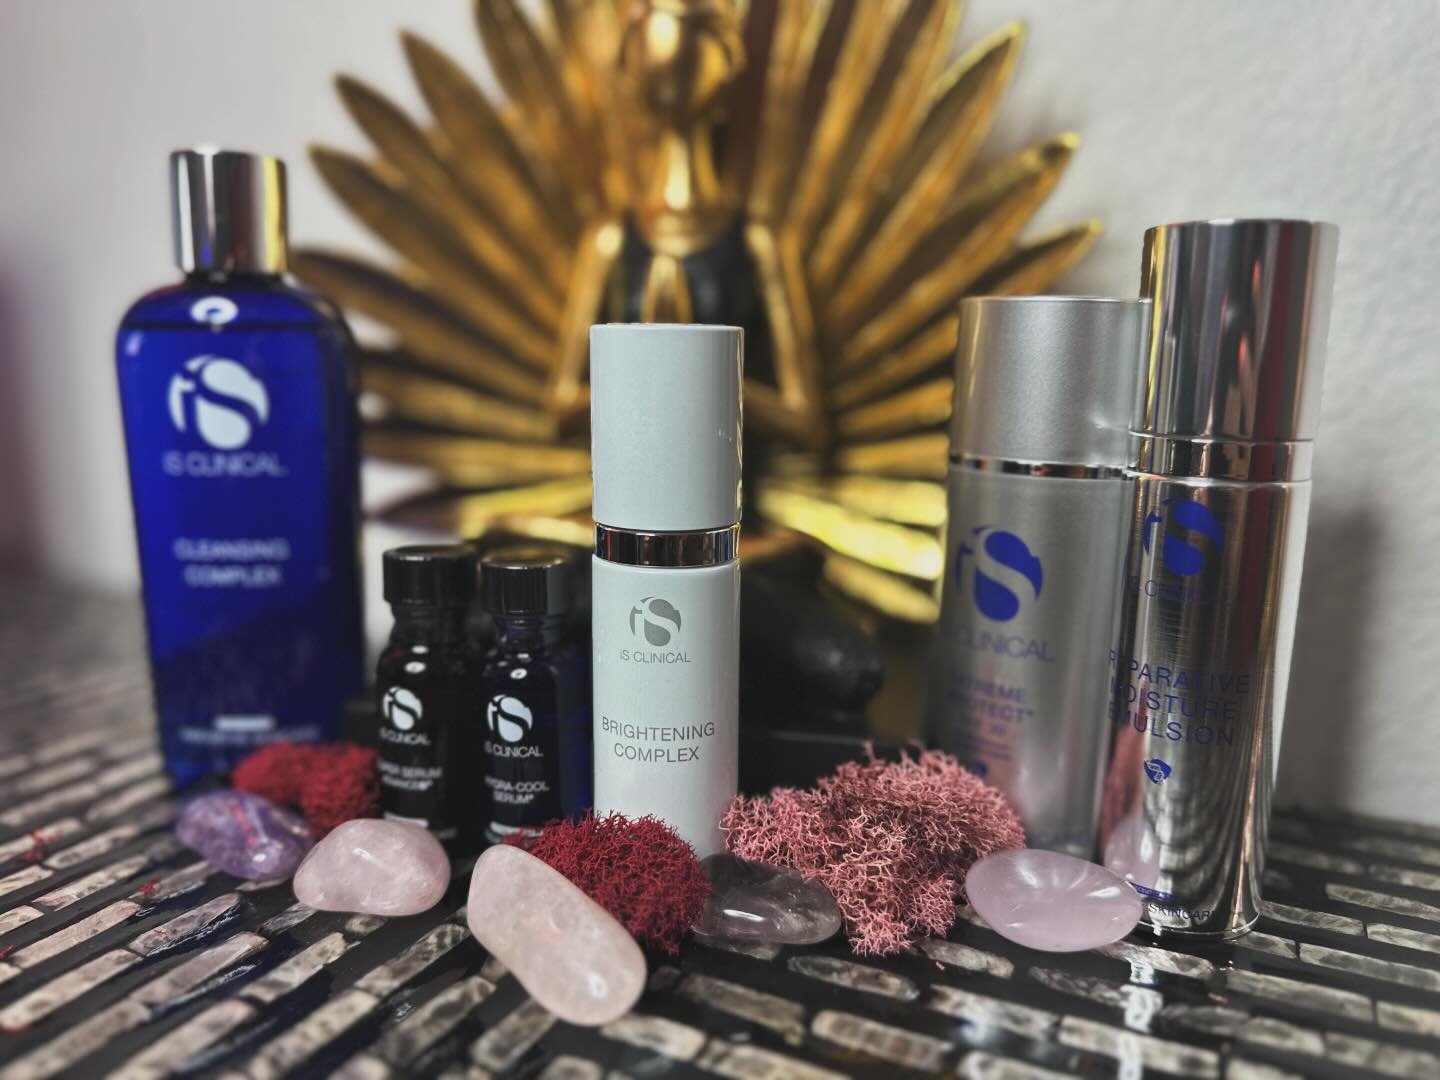 shine bright with this line of @isclinical products ✨

Step 1: CLEAN
Step 2: TREAT
Step 3: HYDRATE
Step 4: PROTECT 

stop by and see us to revamp your skin care essentials!